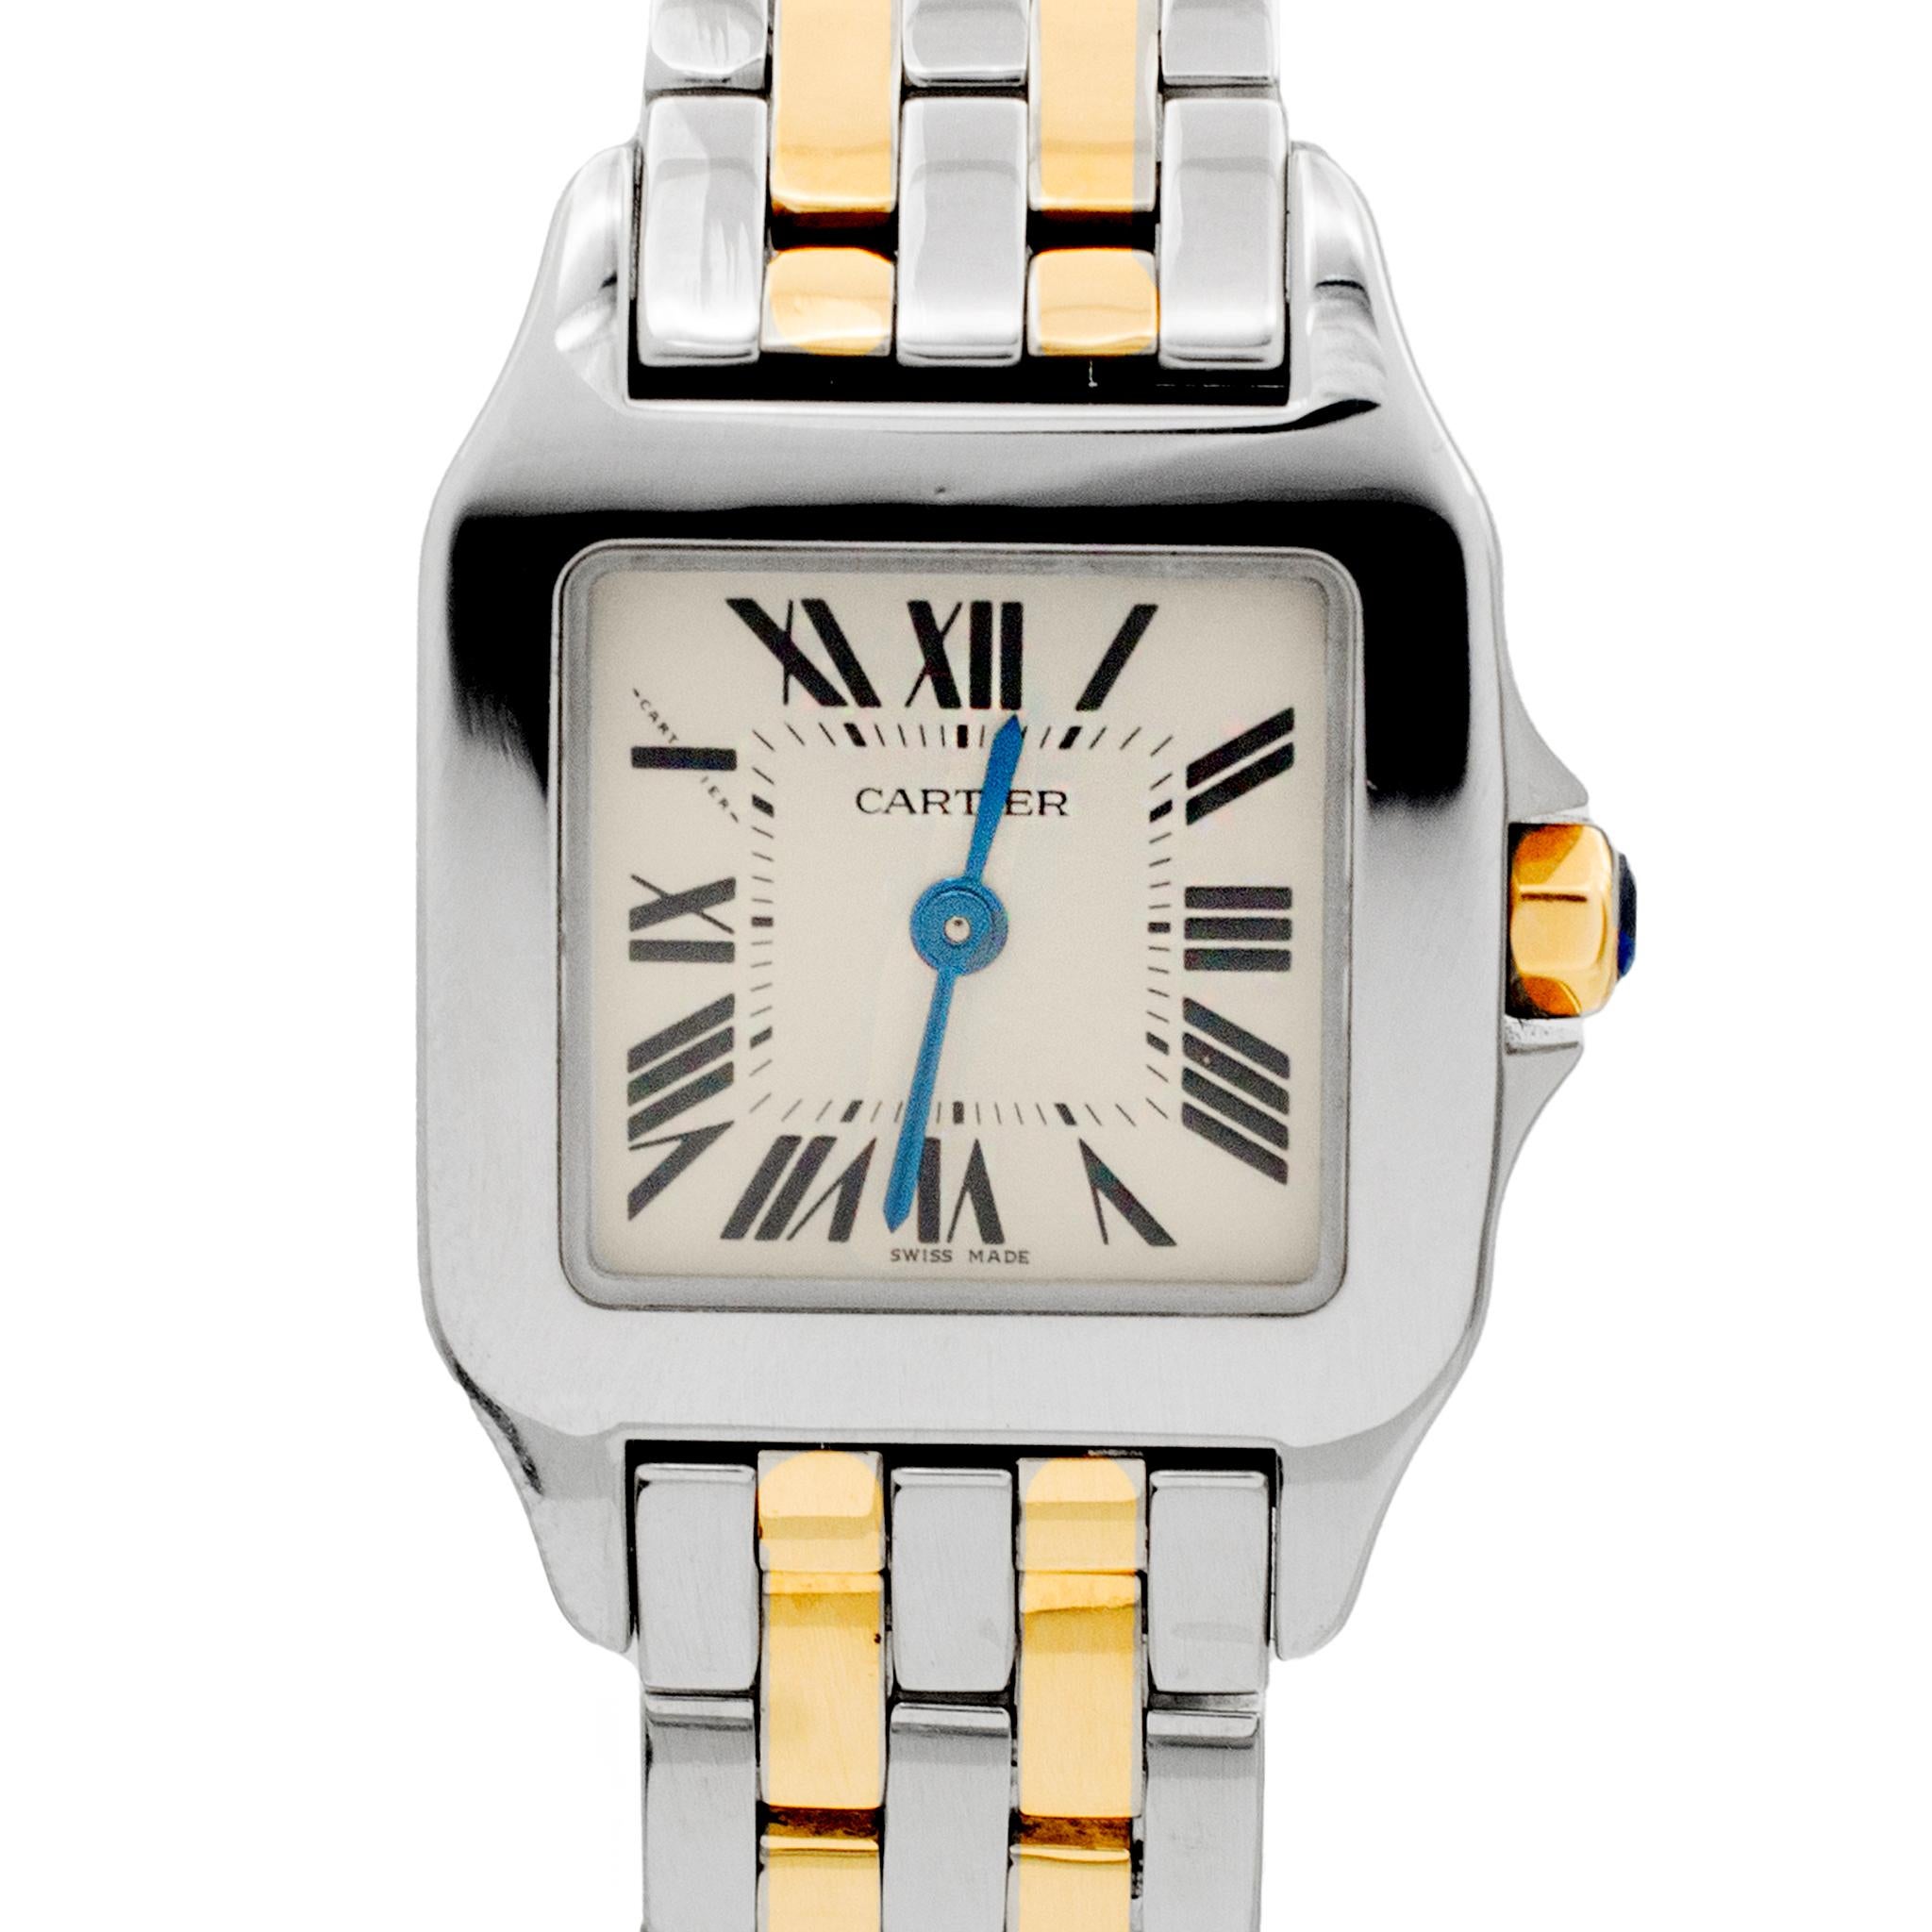 Brand: Cartier 

Gender: Ladies

Metal Type: 18K yellow gold and Stainless Steel

Weight: 50.20 grams

Ladies 18K yellow gold and stainless steel Cartier Swiss made watch with original box. The 